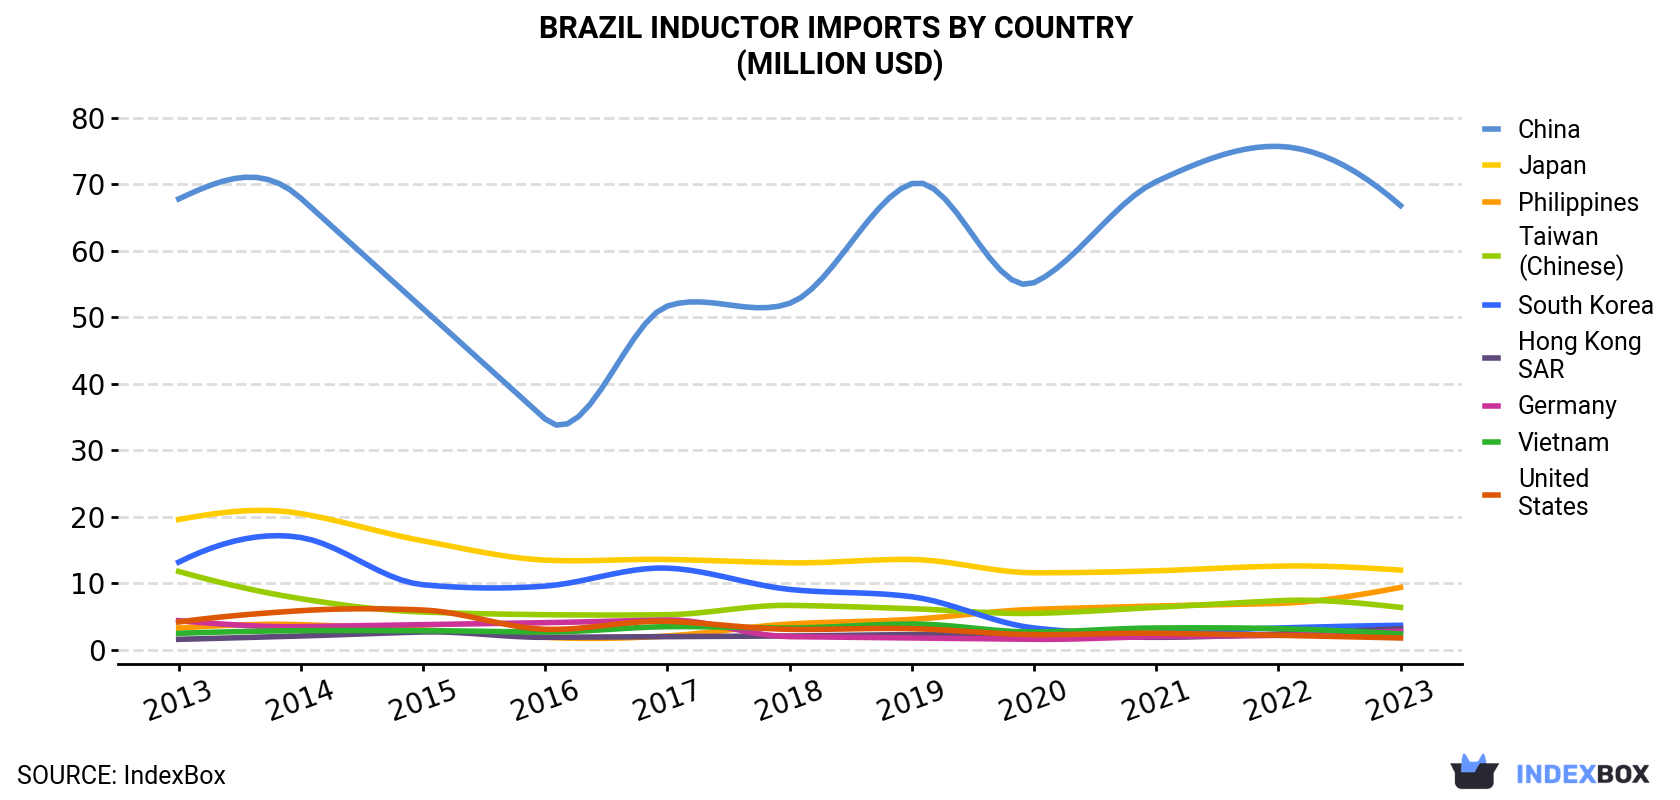 Brazil Inductor Imports By Country (Million USD)